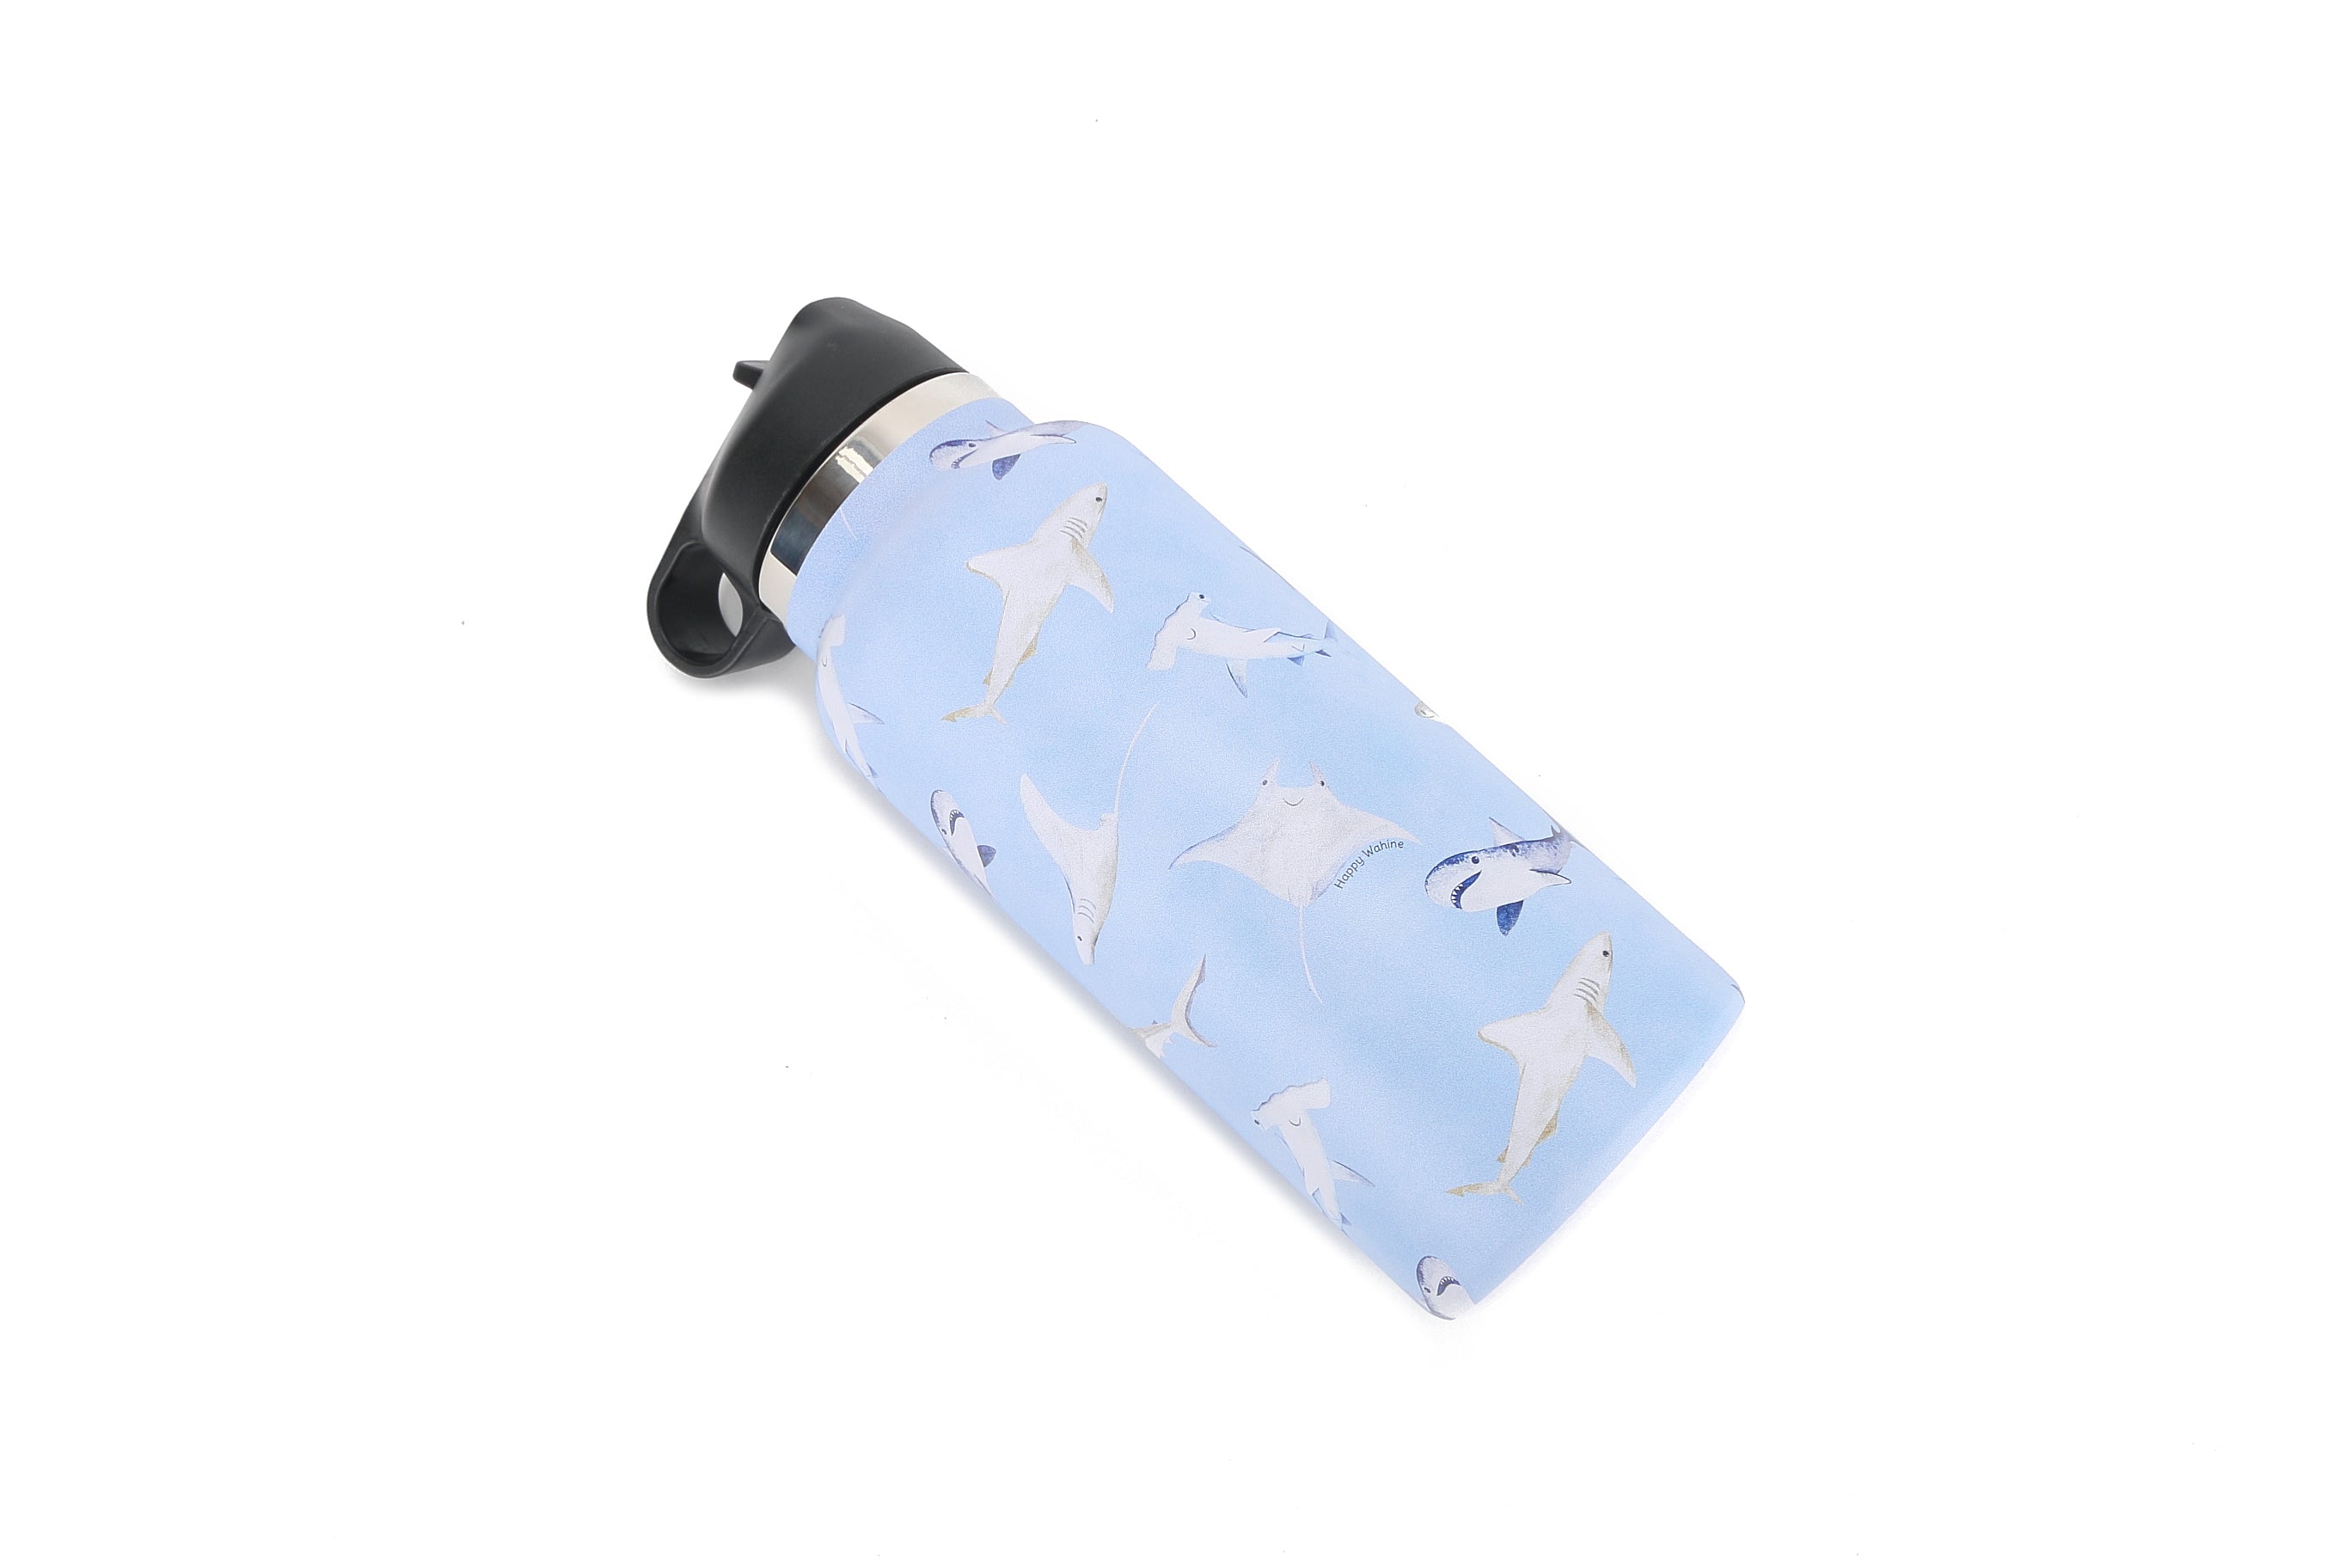 Insulated Water Bottle 32oz Happy Sharks Blue